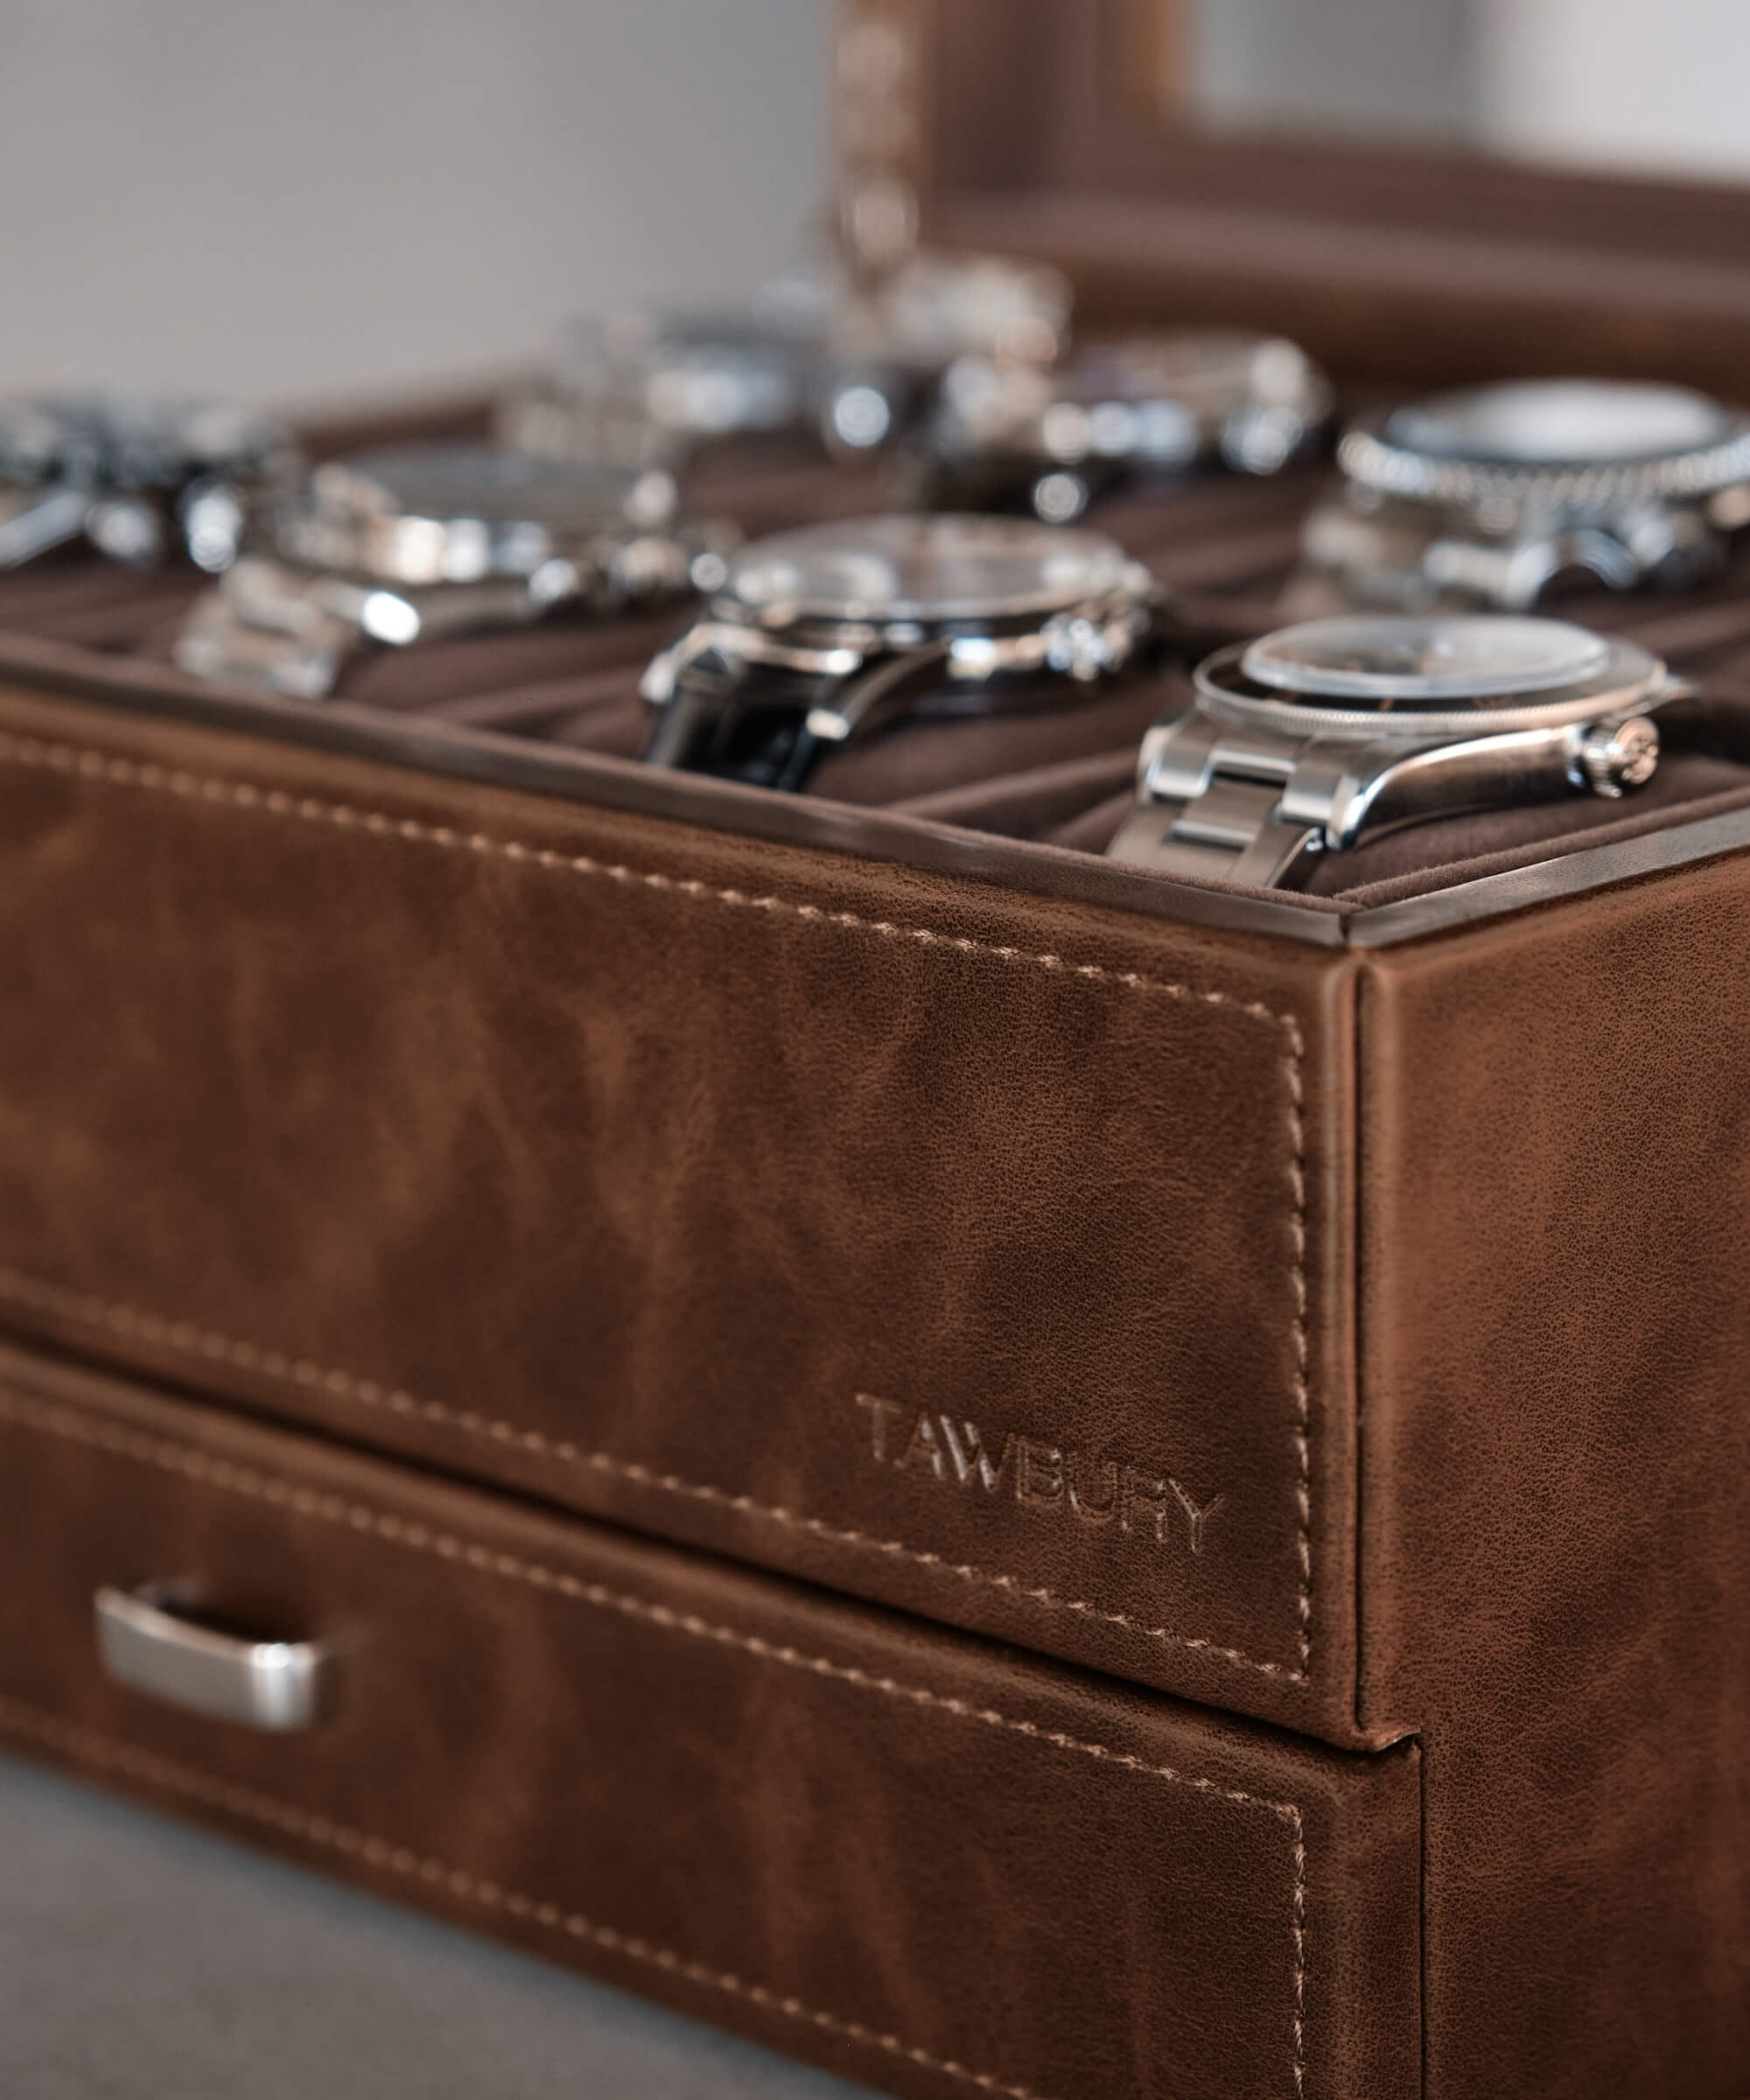 A TAWBURY Bayswater 8 Slot Watch Box with Drawer - Brown.